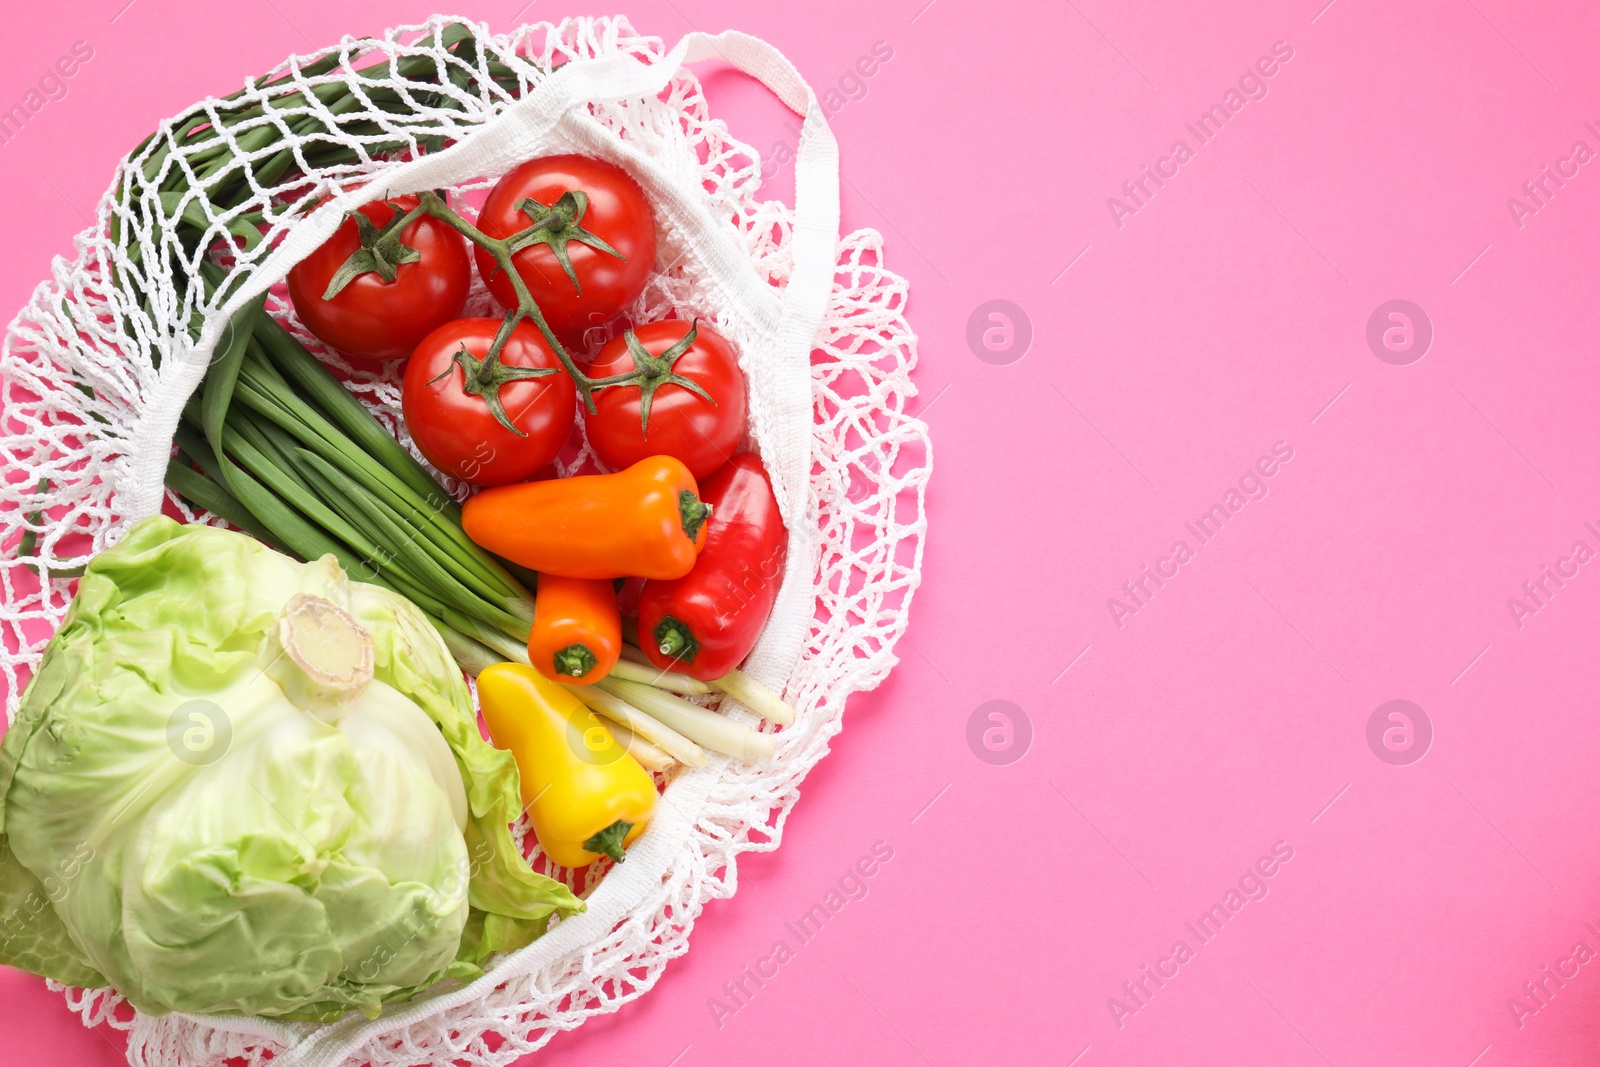 Photo of String bag with different vegetables on bright pink background, top view. Space for text